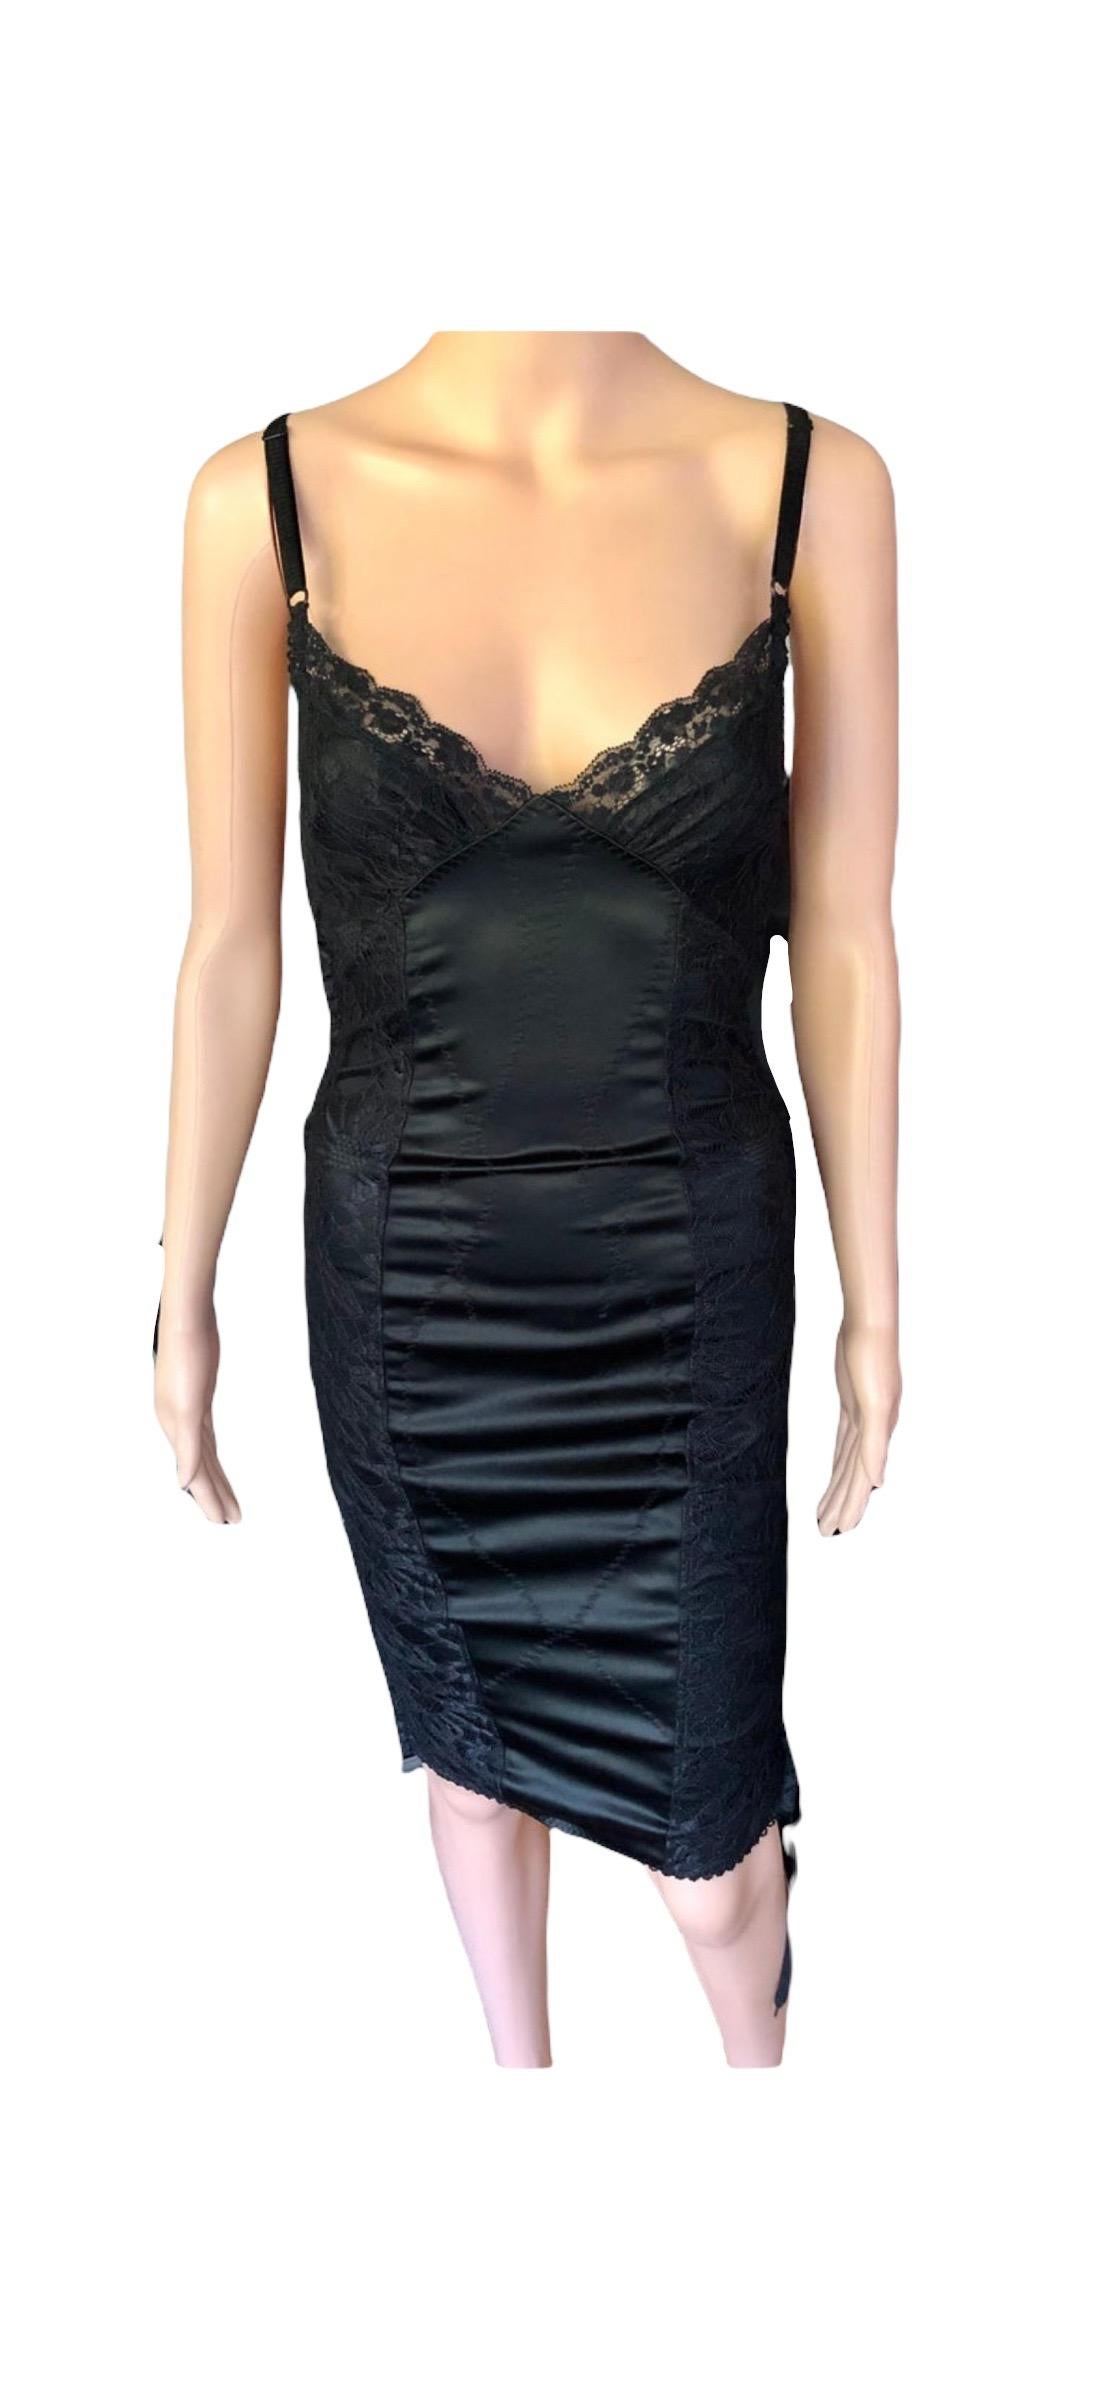 D&G by Dolce & Gabbana Lace Up Bodycon Black Dress For Sale 4